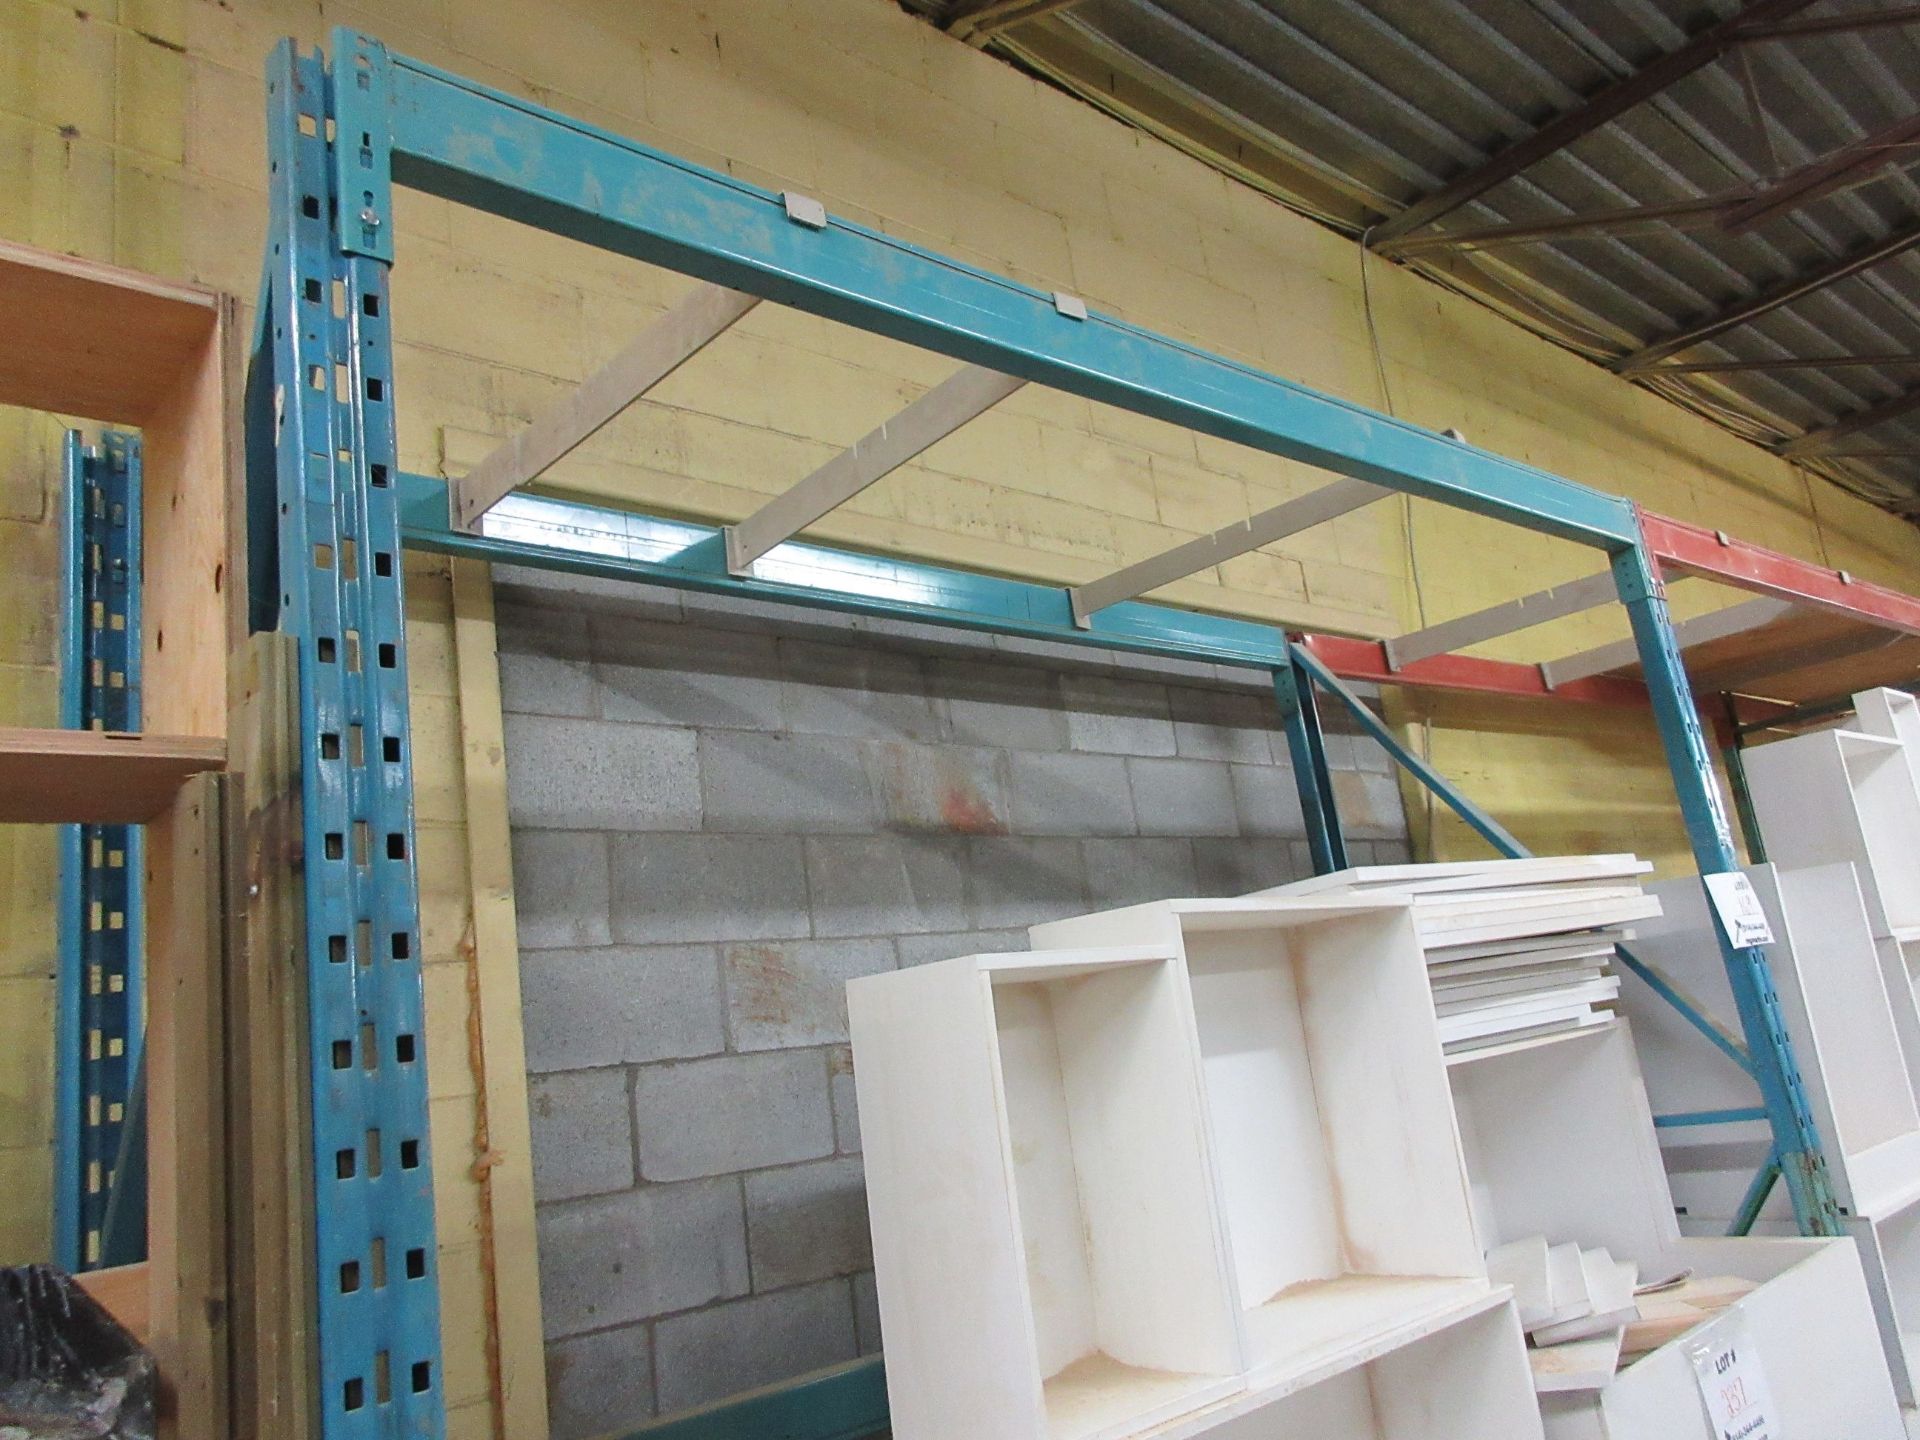 Sections of industrial racking 9ft W x 36" D x 9ft H (6) (SUBJECT TO BANK APPROVAL) - Image 2 of 4